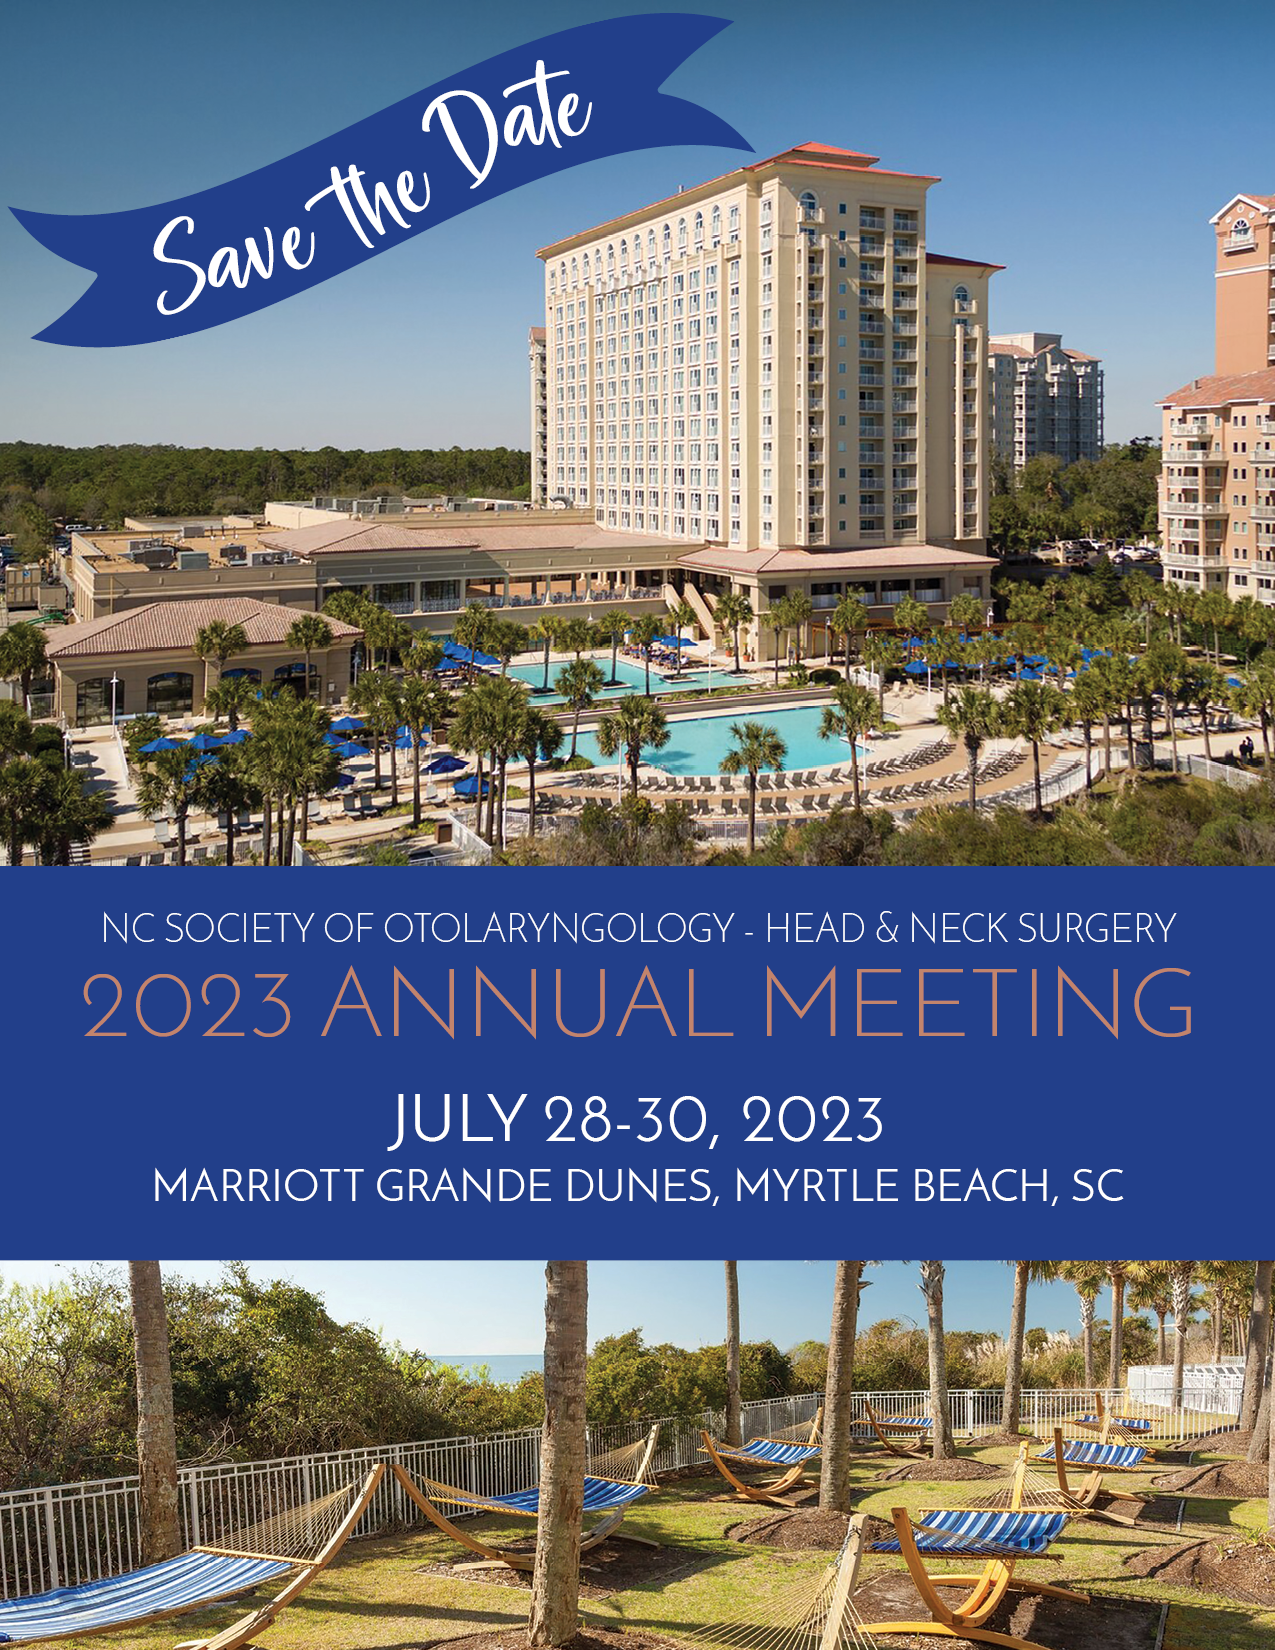 Save the date for the 2023 NC/SC Societies of Otolaryngology Meeting in Myrtle Beach